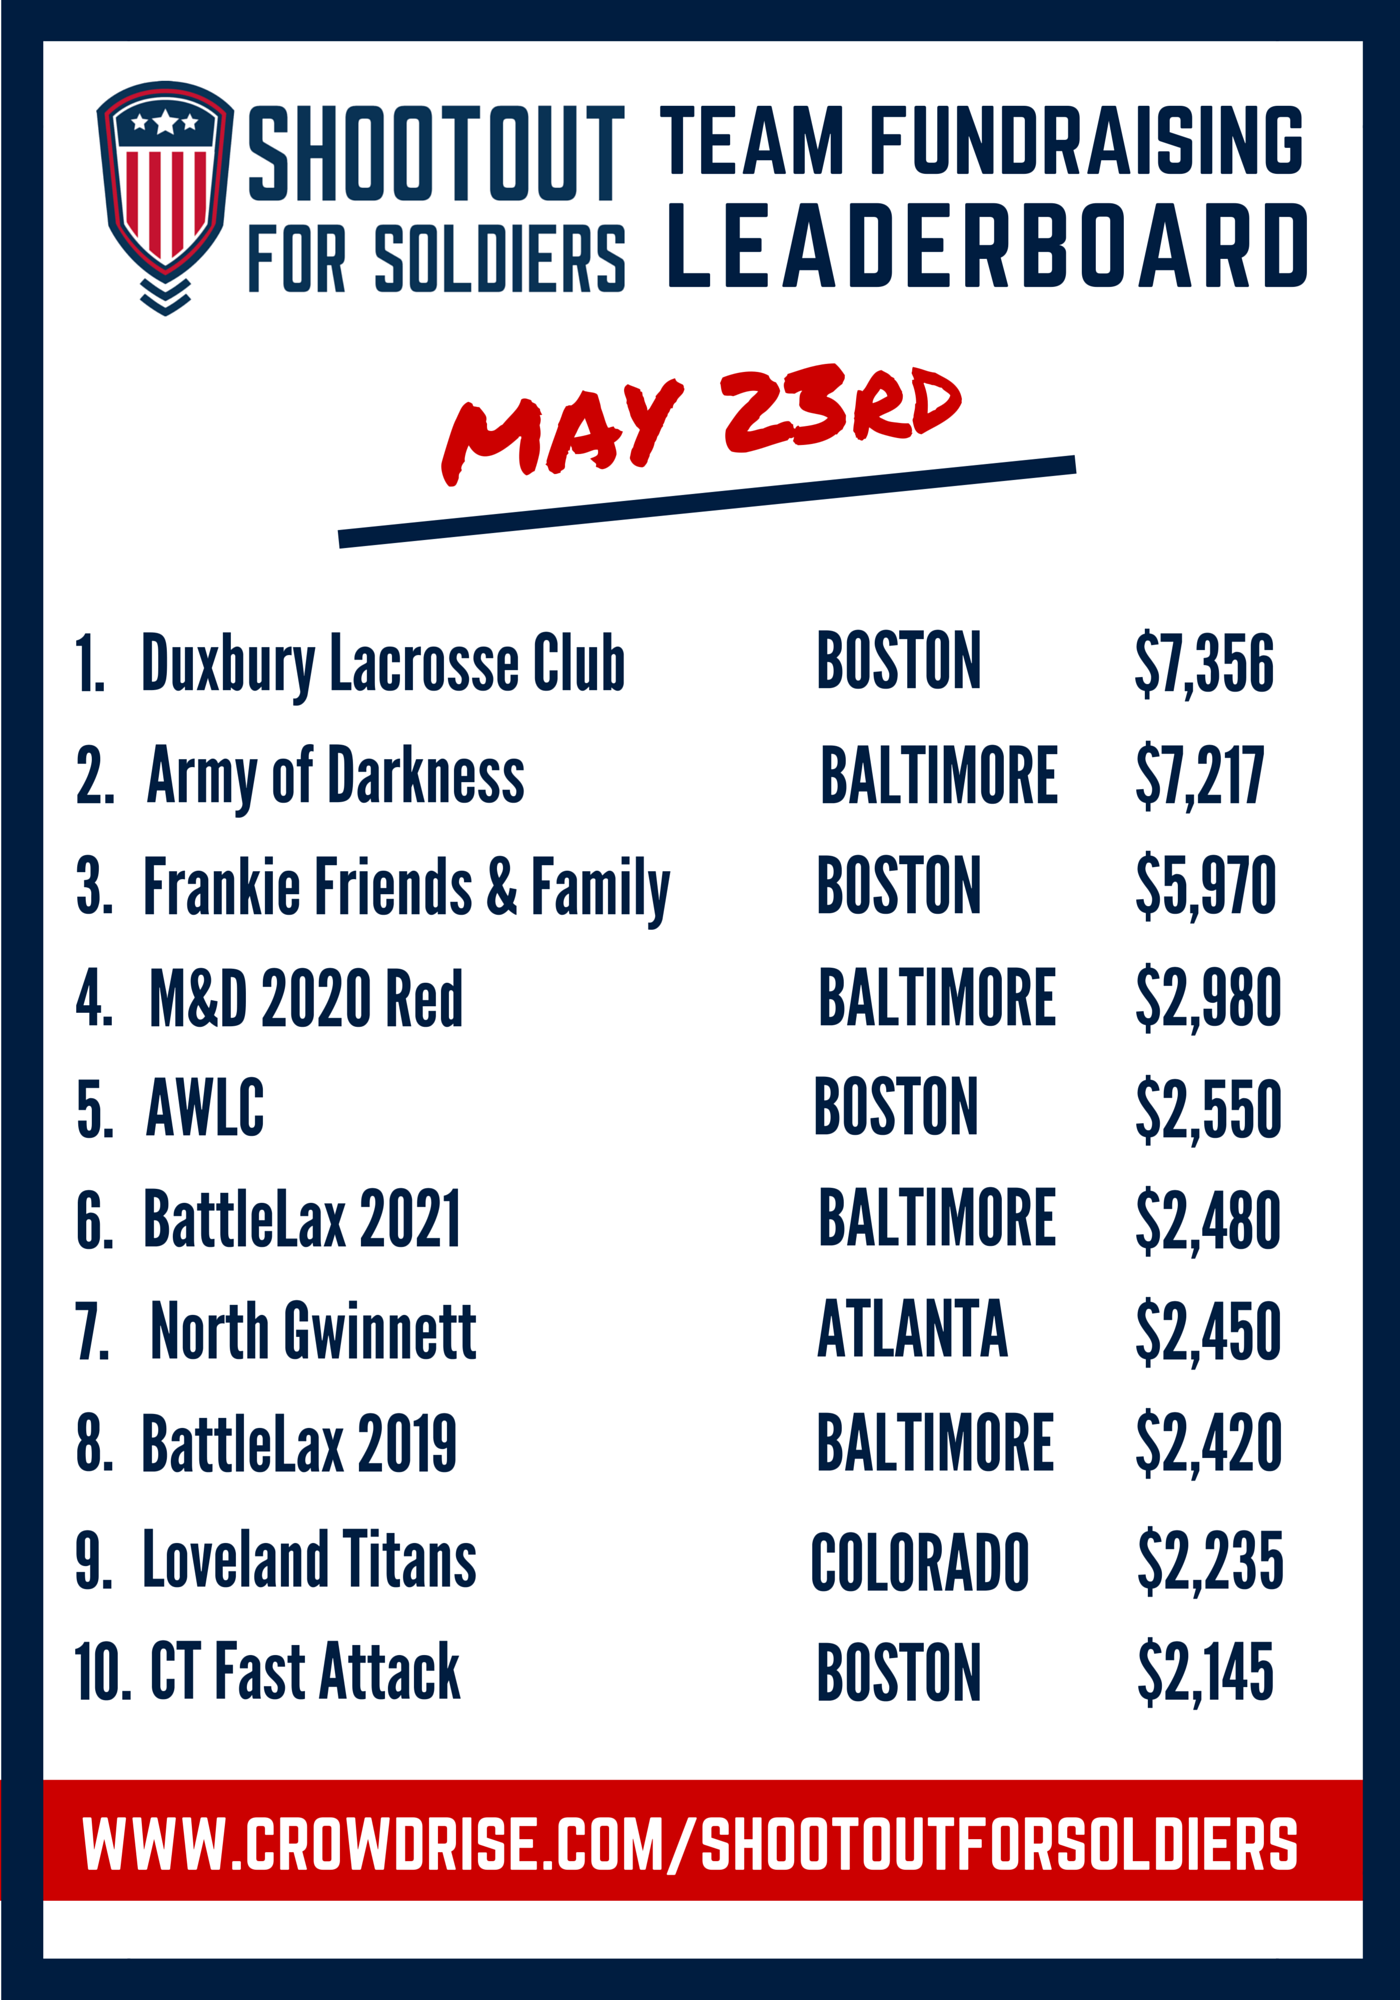 Baltimore and Boston Continue to Lead the Fundraising Charge